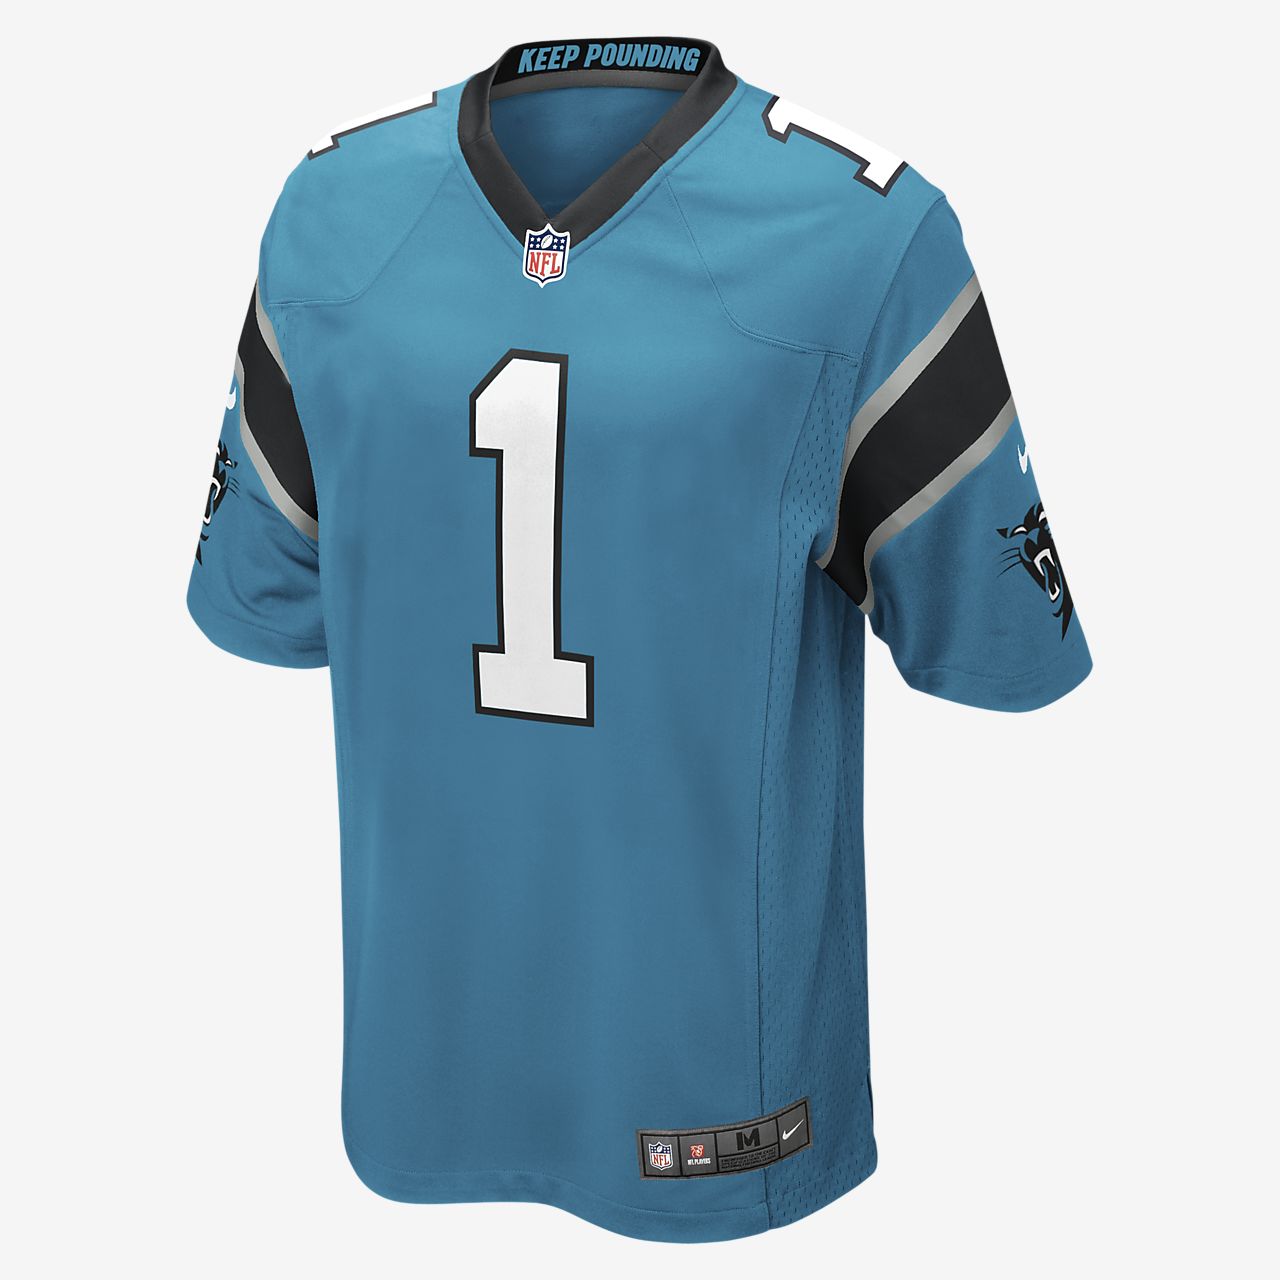 where can i buy a panthers jersey